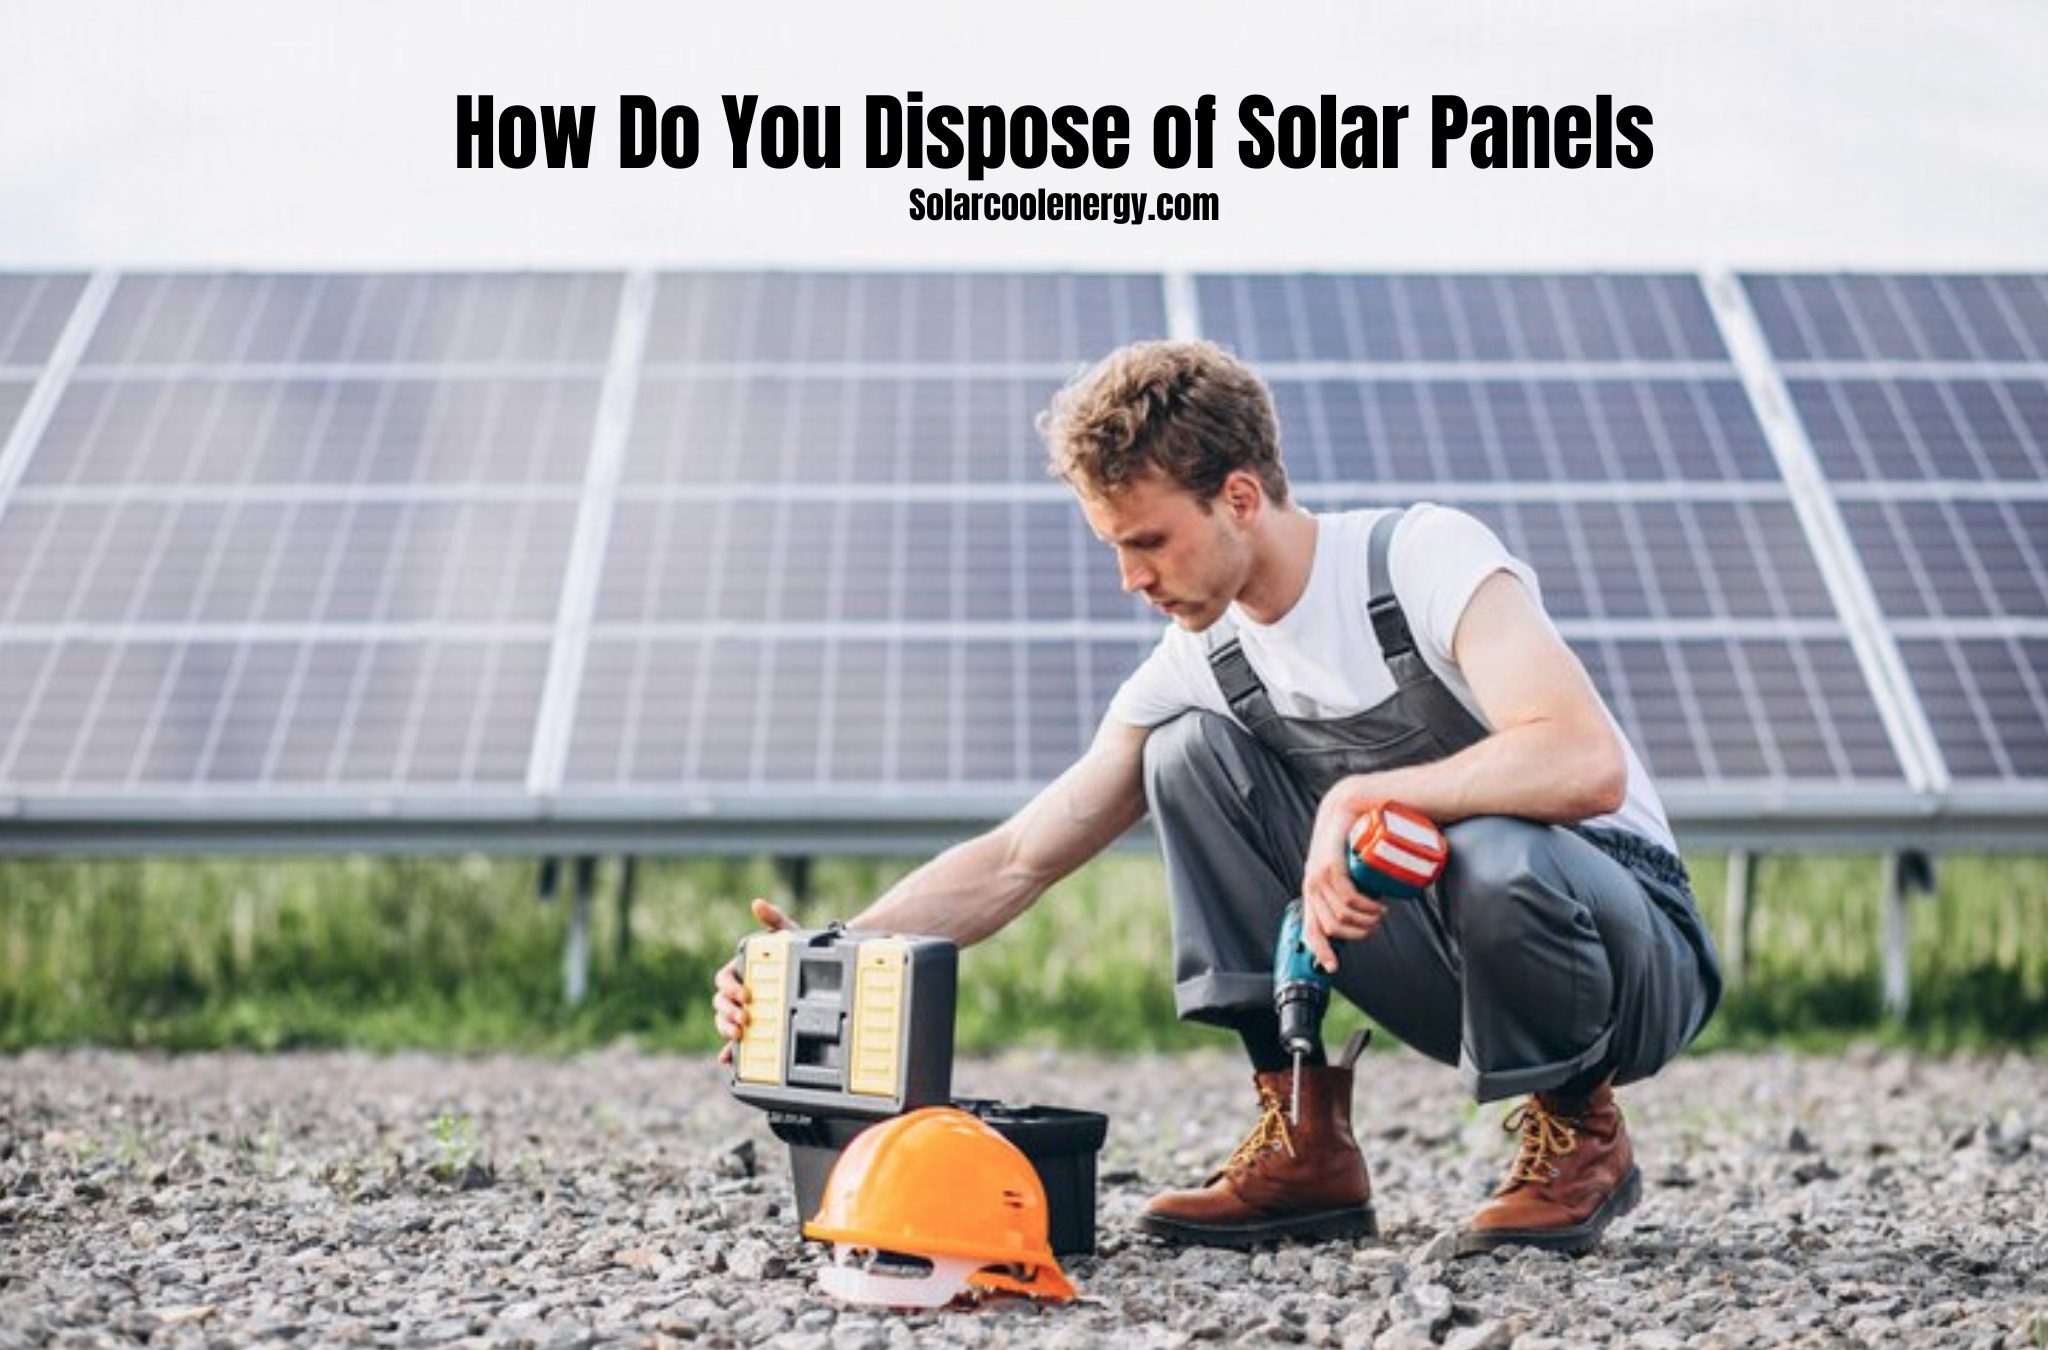 How Do You Dispose of Solar Panels